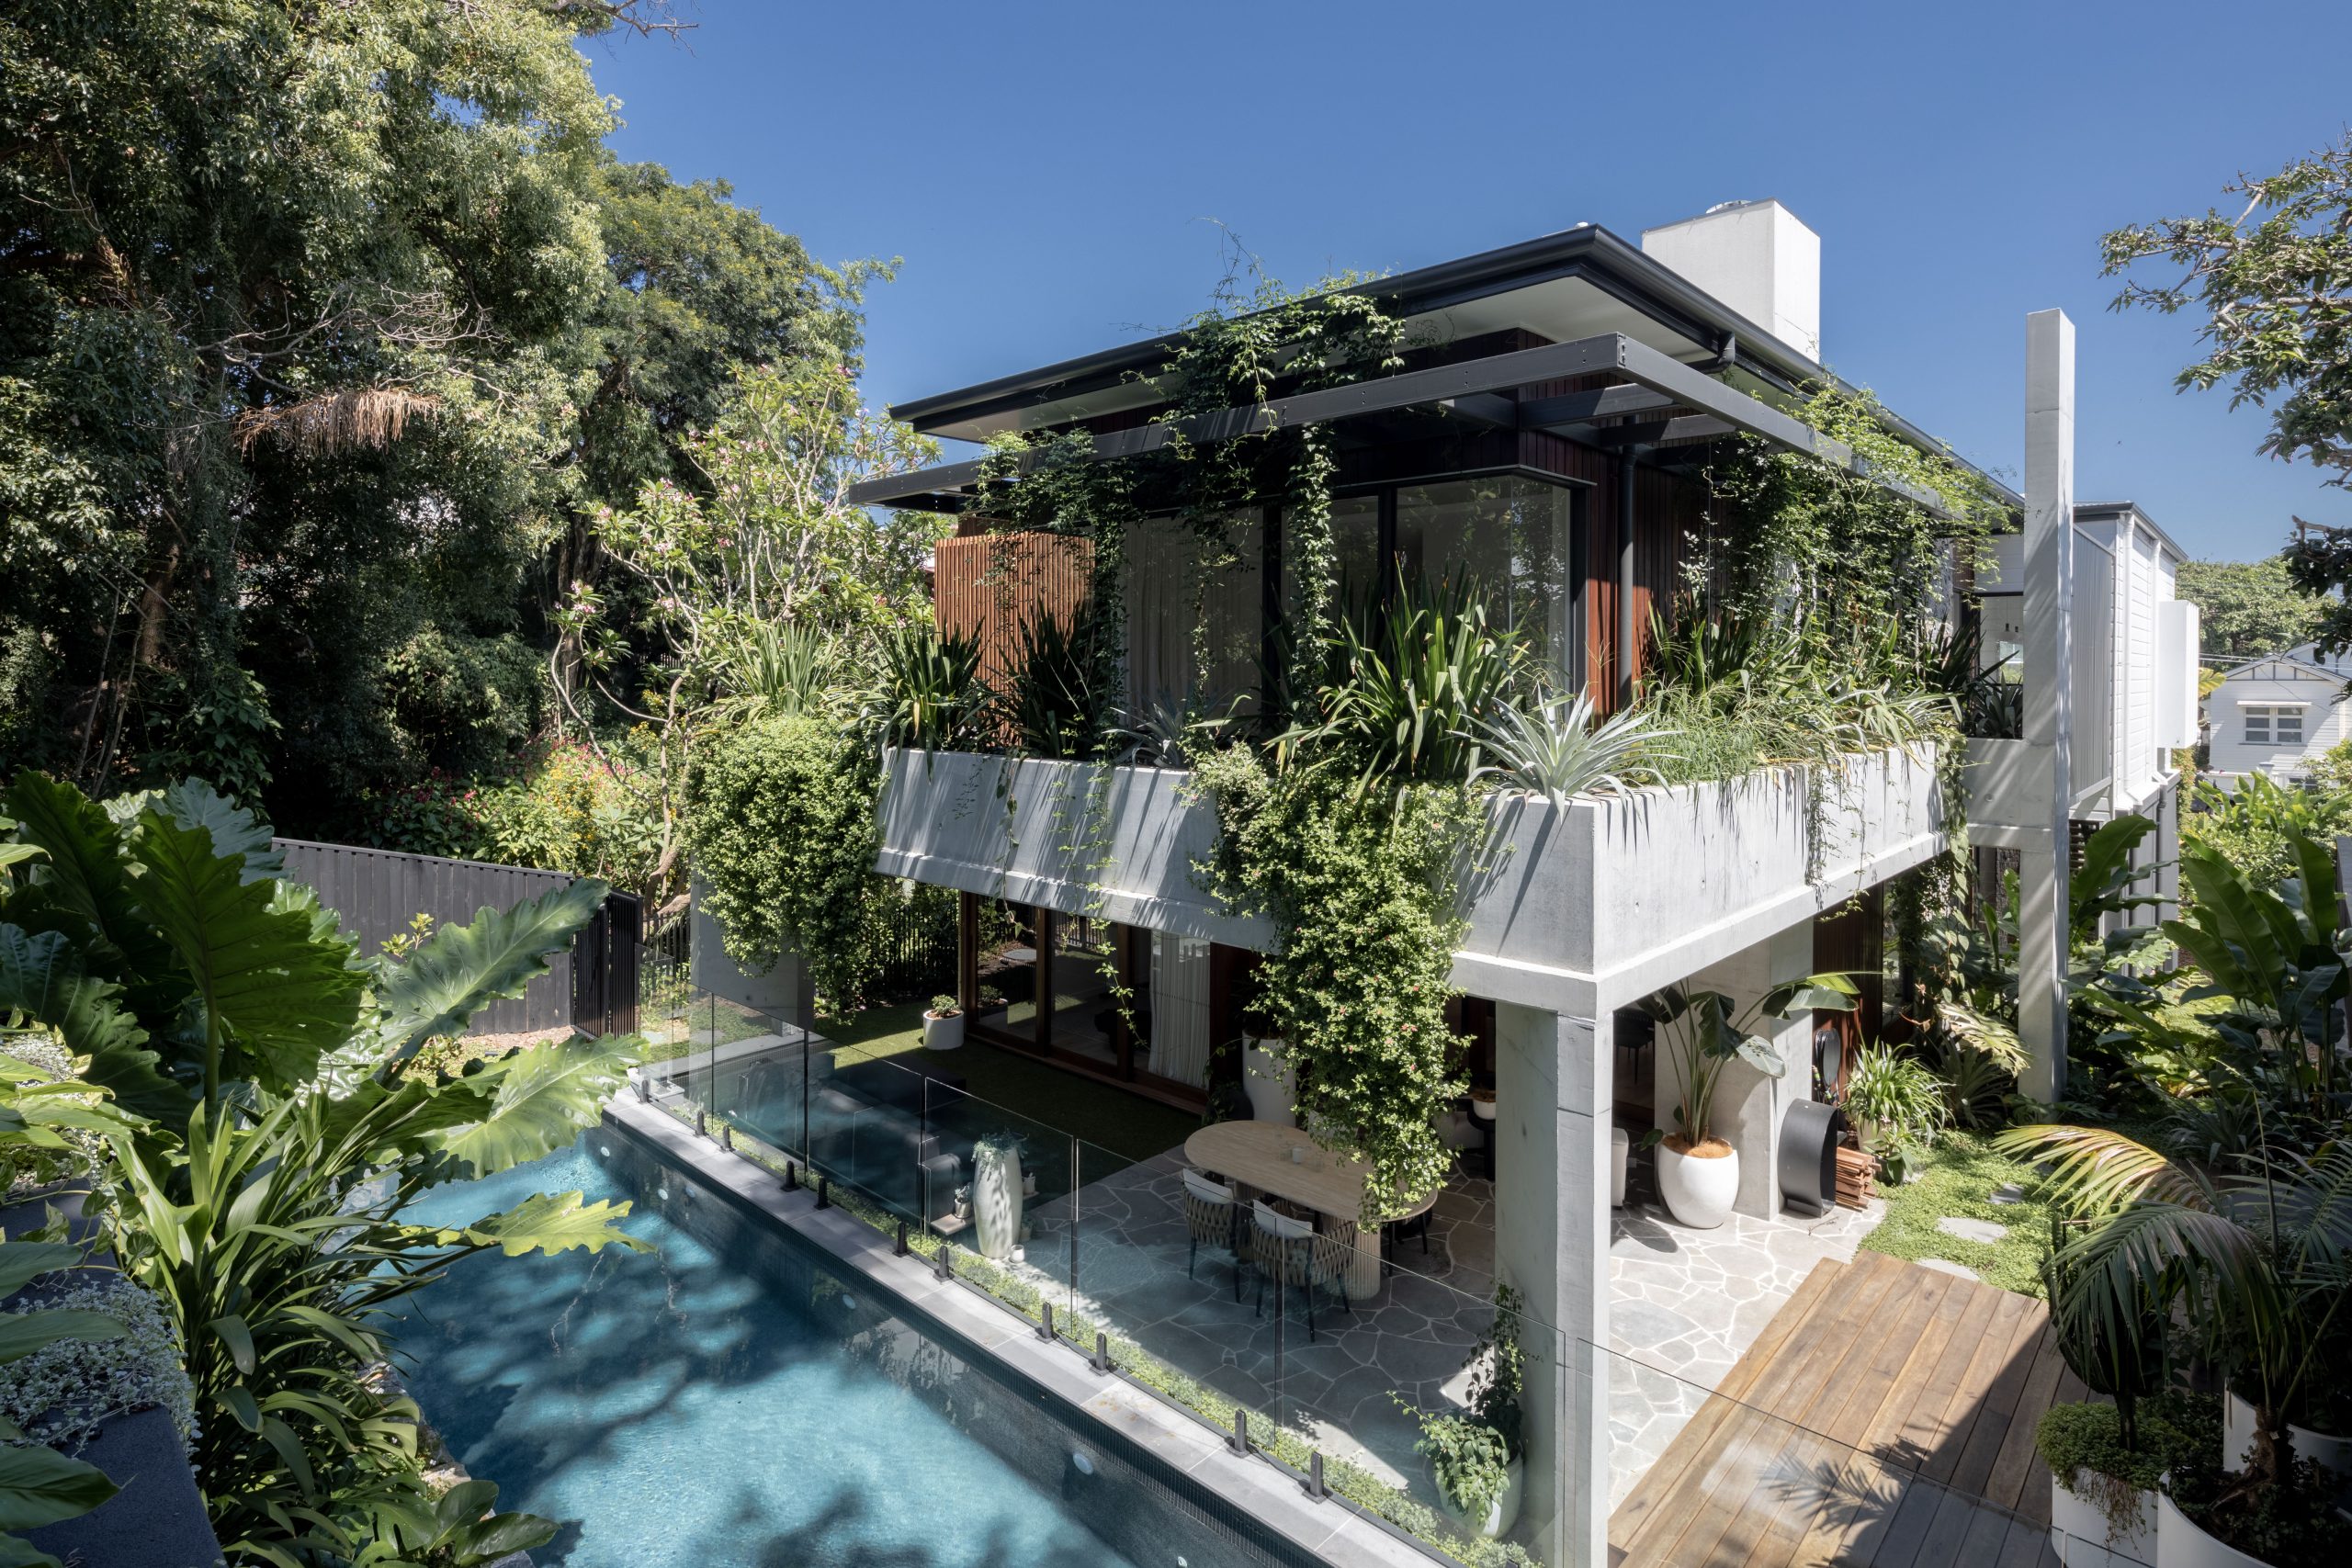 Architect Alexandra Buchanan created a game changing extension to this traditional Queenslander by treating garden and house as one. Image credit: James Peters